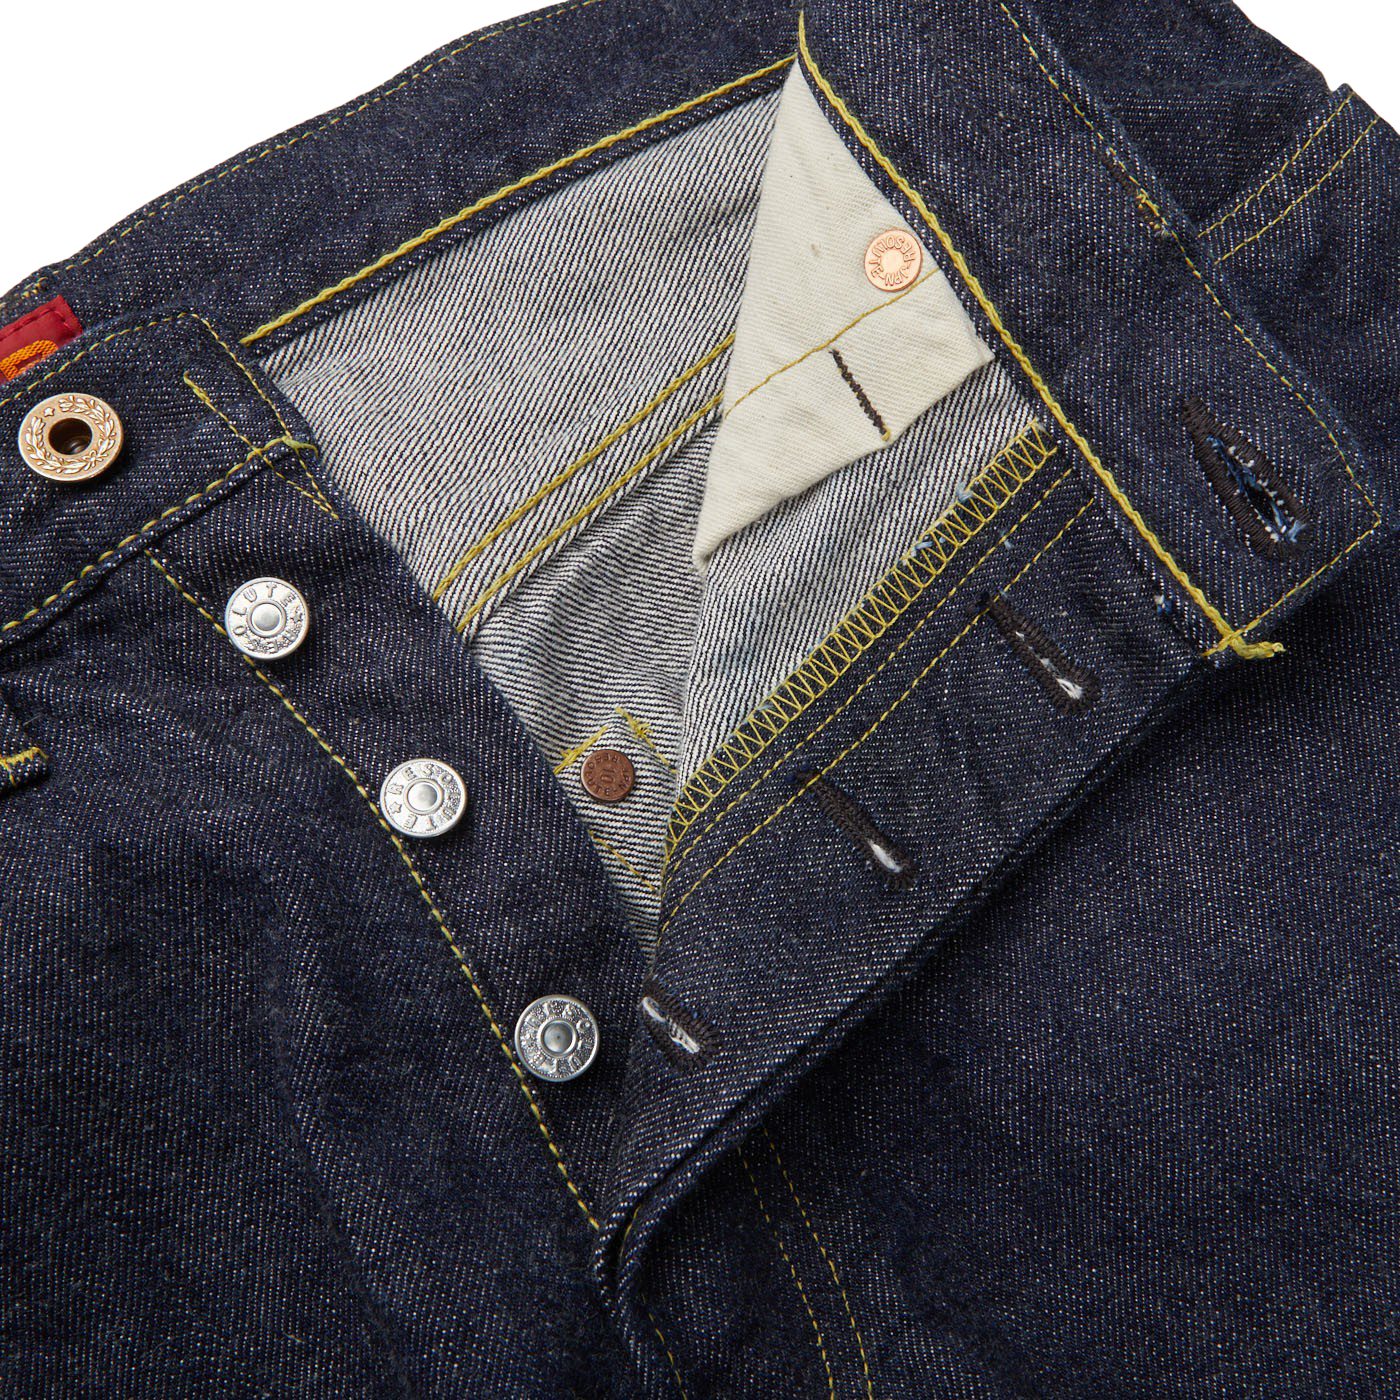 Close-up of a Resolute selvedge denim jacket with an open flap showing an inner striped lining and a mix of silver and brass buttons.